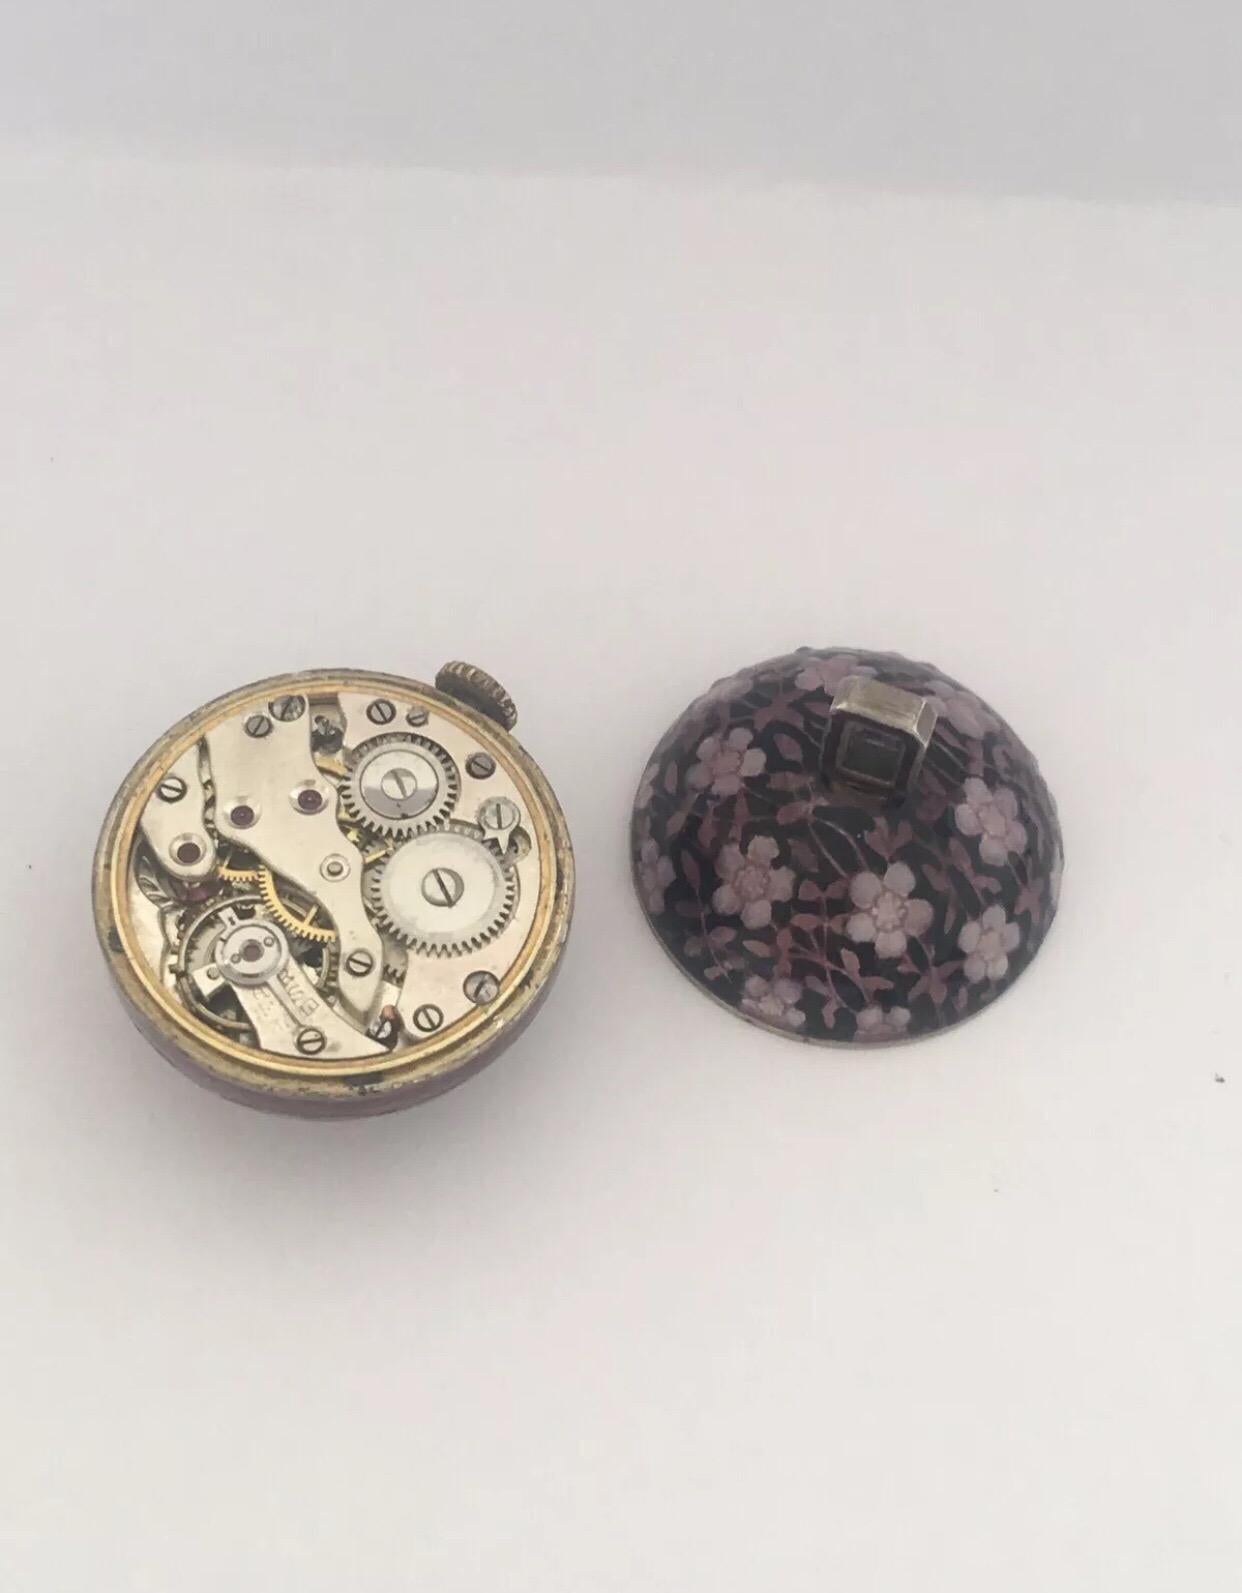 
Small Antique Beautiful Enamel Pendant / Ball Watch.

This beautiful pre-owned  pendant / ball watch is in good working condition. It is recently been serviced and it keeps a good time. 

Please study the images carefully as form part of the